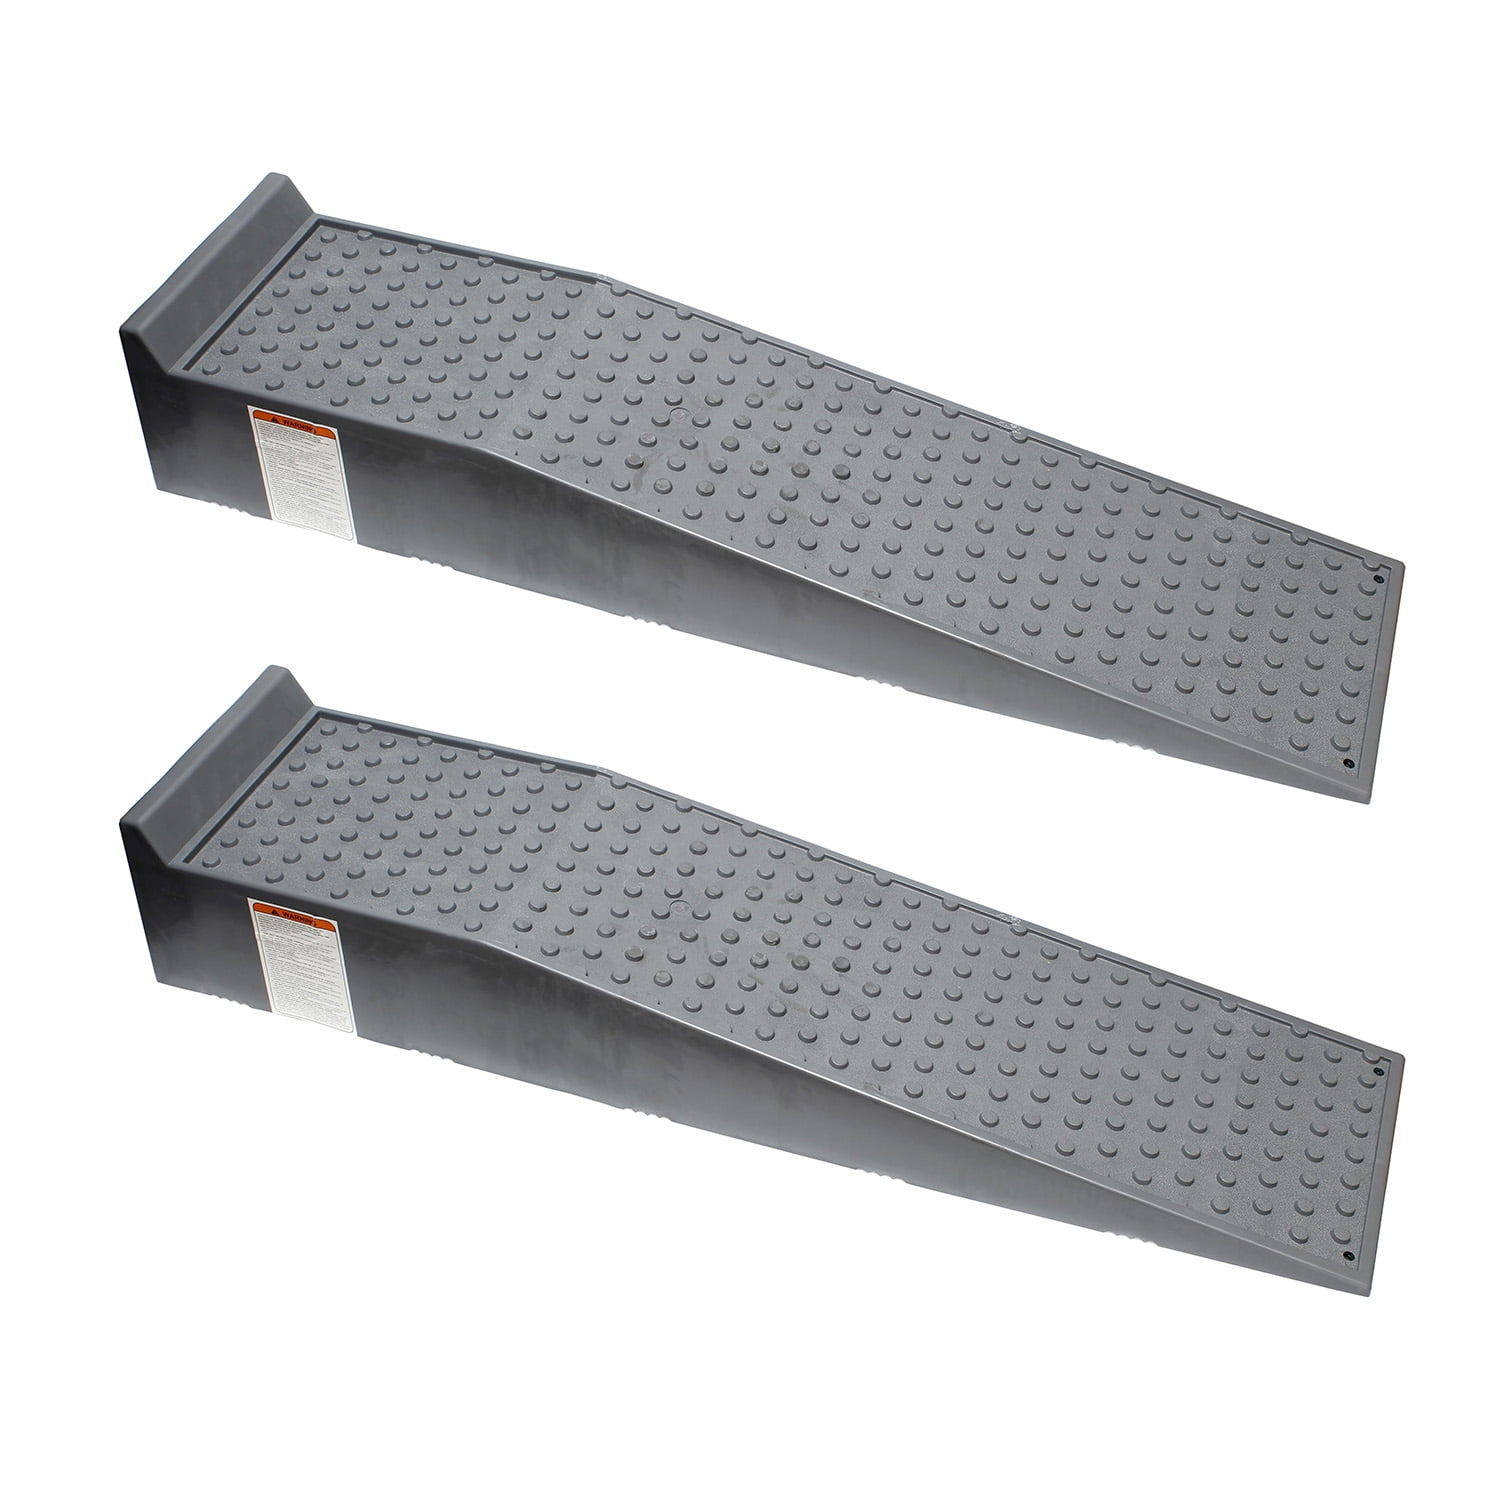 2 Pack Discount Ramps 6009-V2 Low Profile Plastic Car Service Ramps 